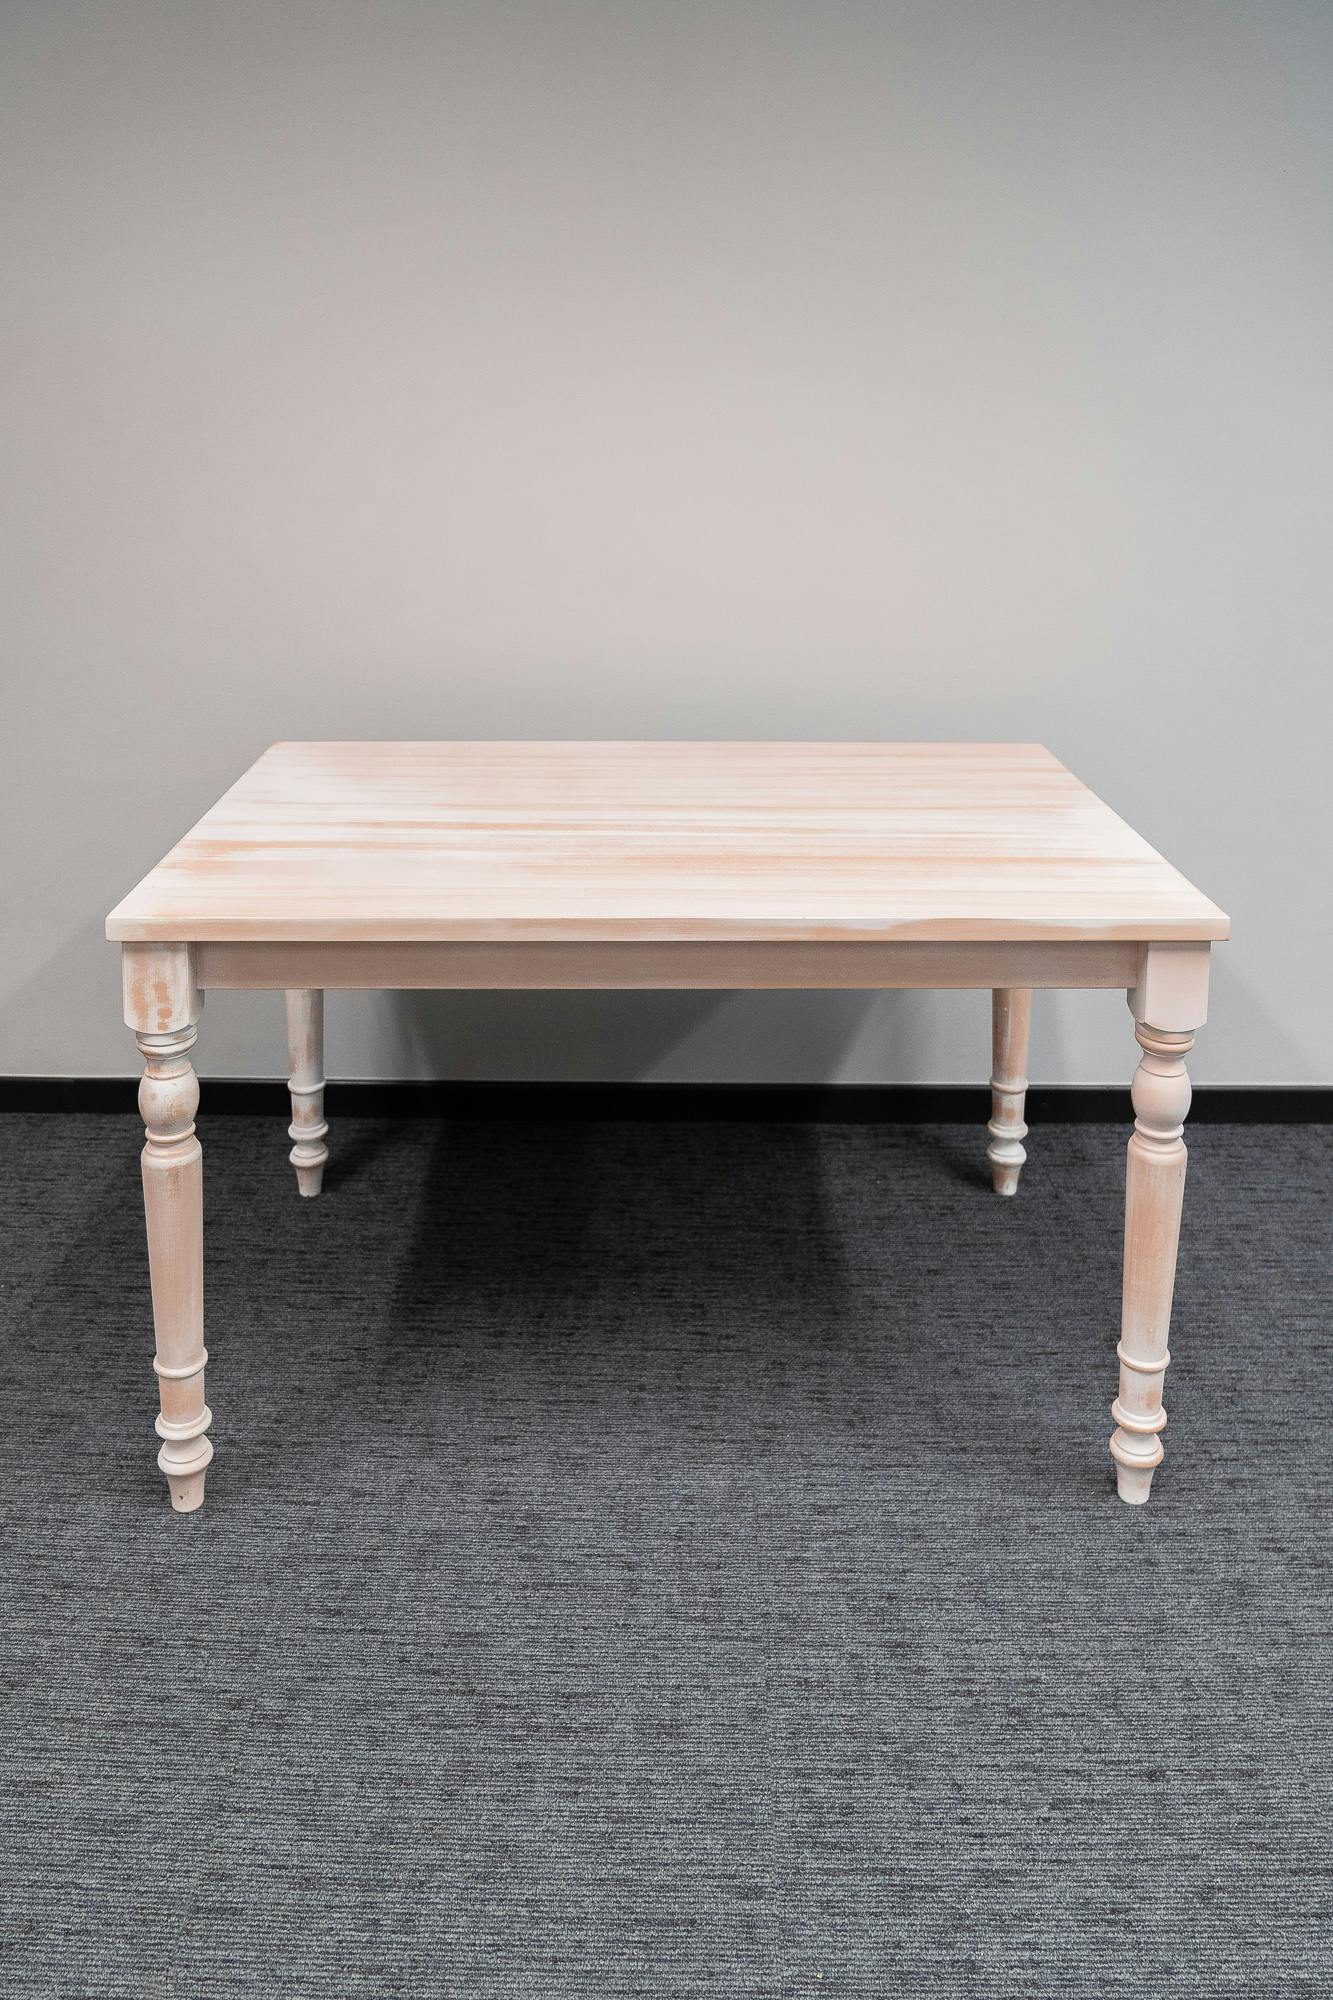 Rectangular wooden table - Relieve Furniture